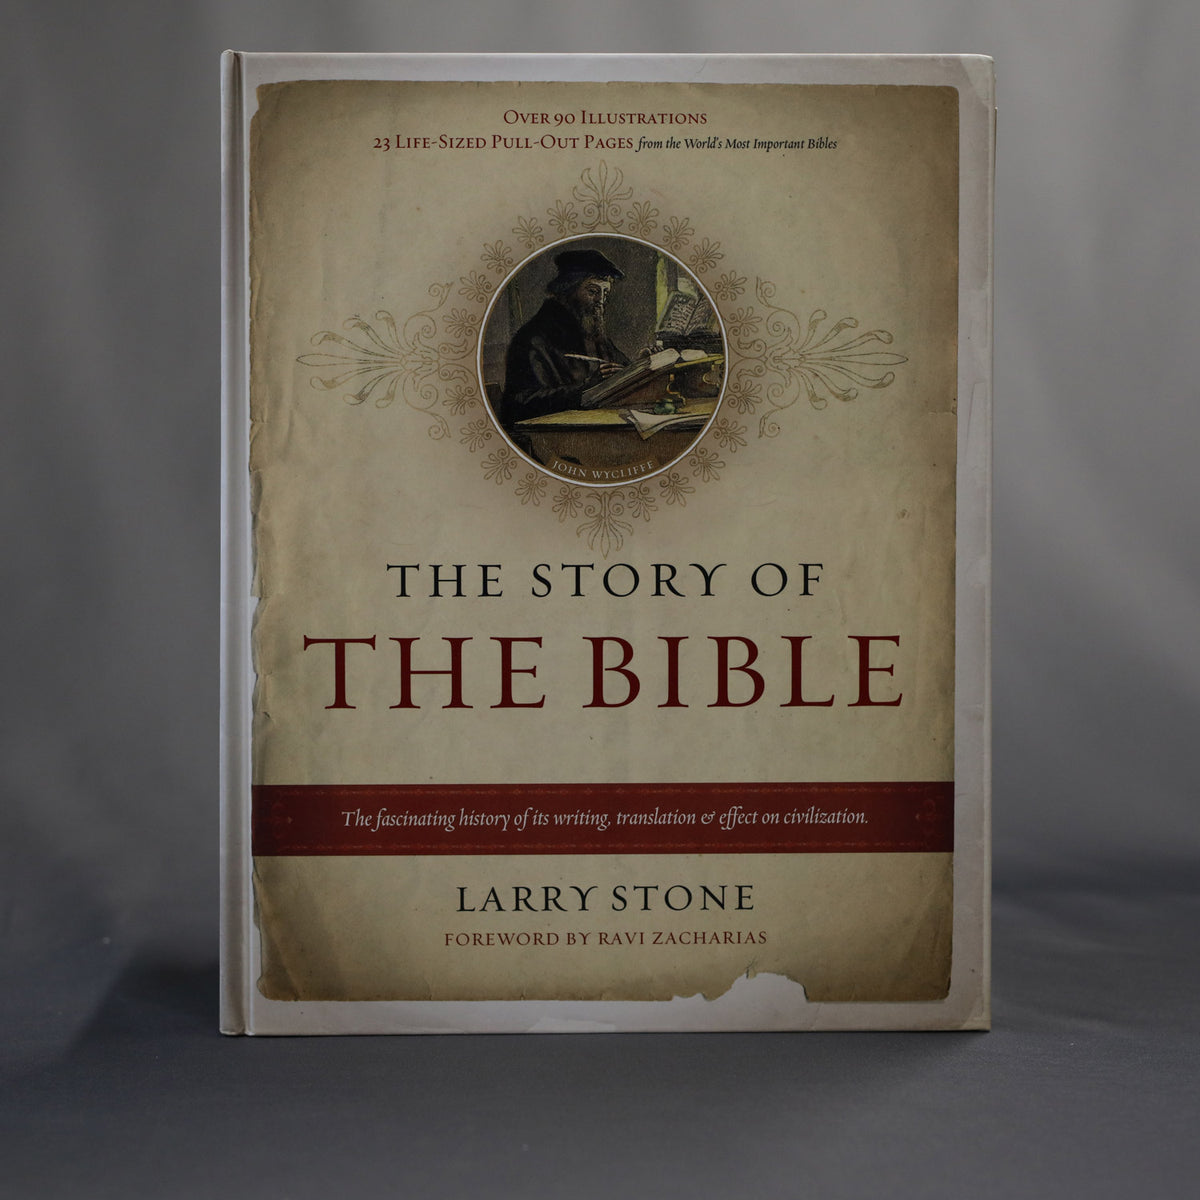 The Story of the Bible (Stone)